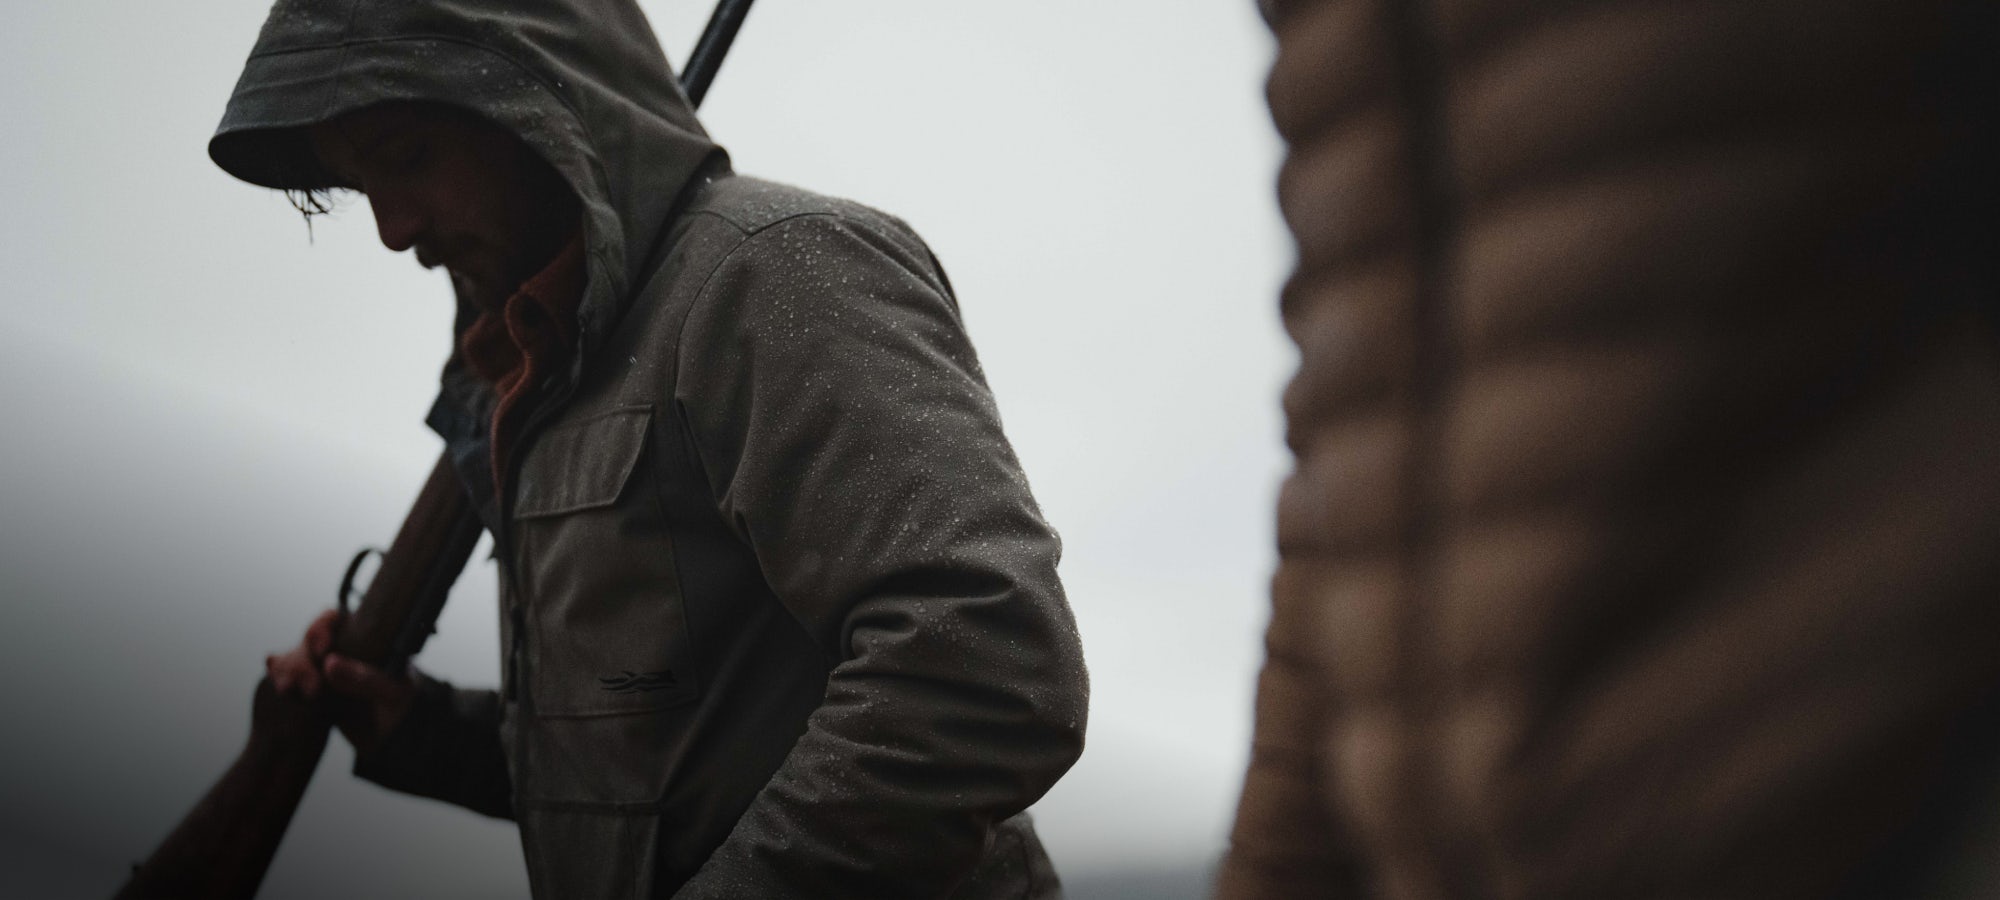 The All-New Grindstone Work Jacket | SITKA Gear